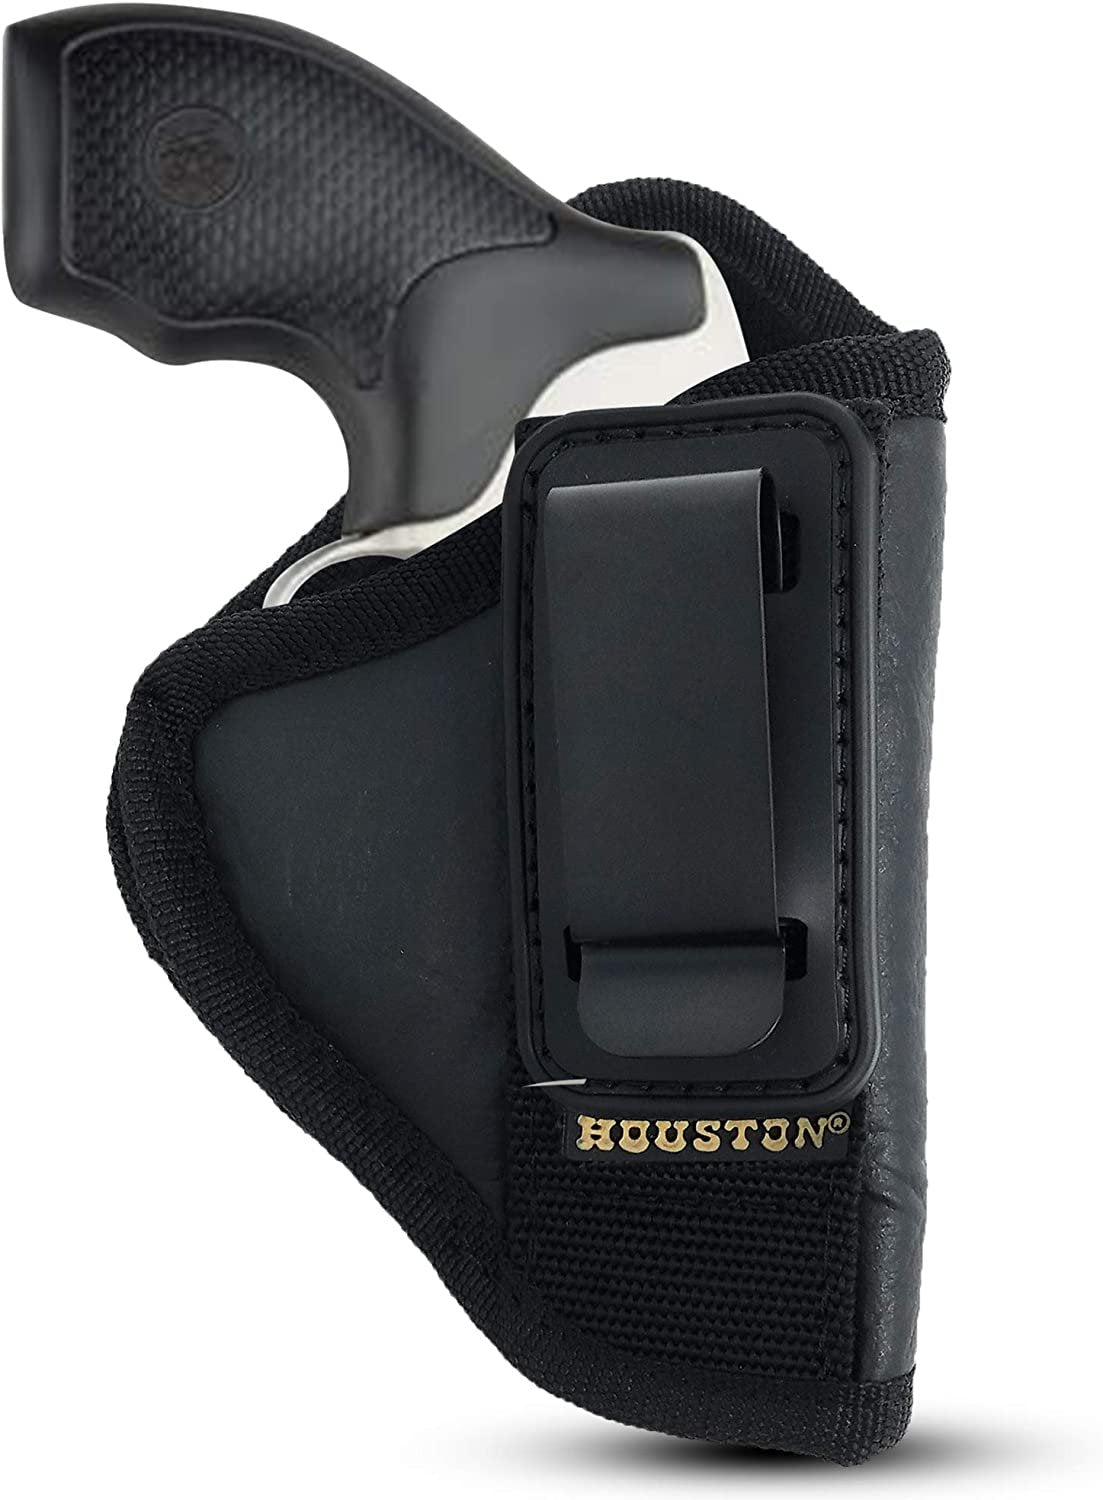 IWB TUCKABLE Revolver Holster by Houston - ECO Leather Concealed Carry